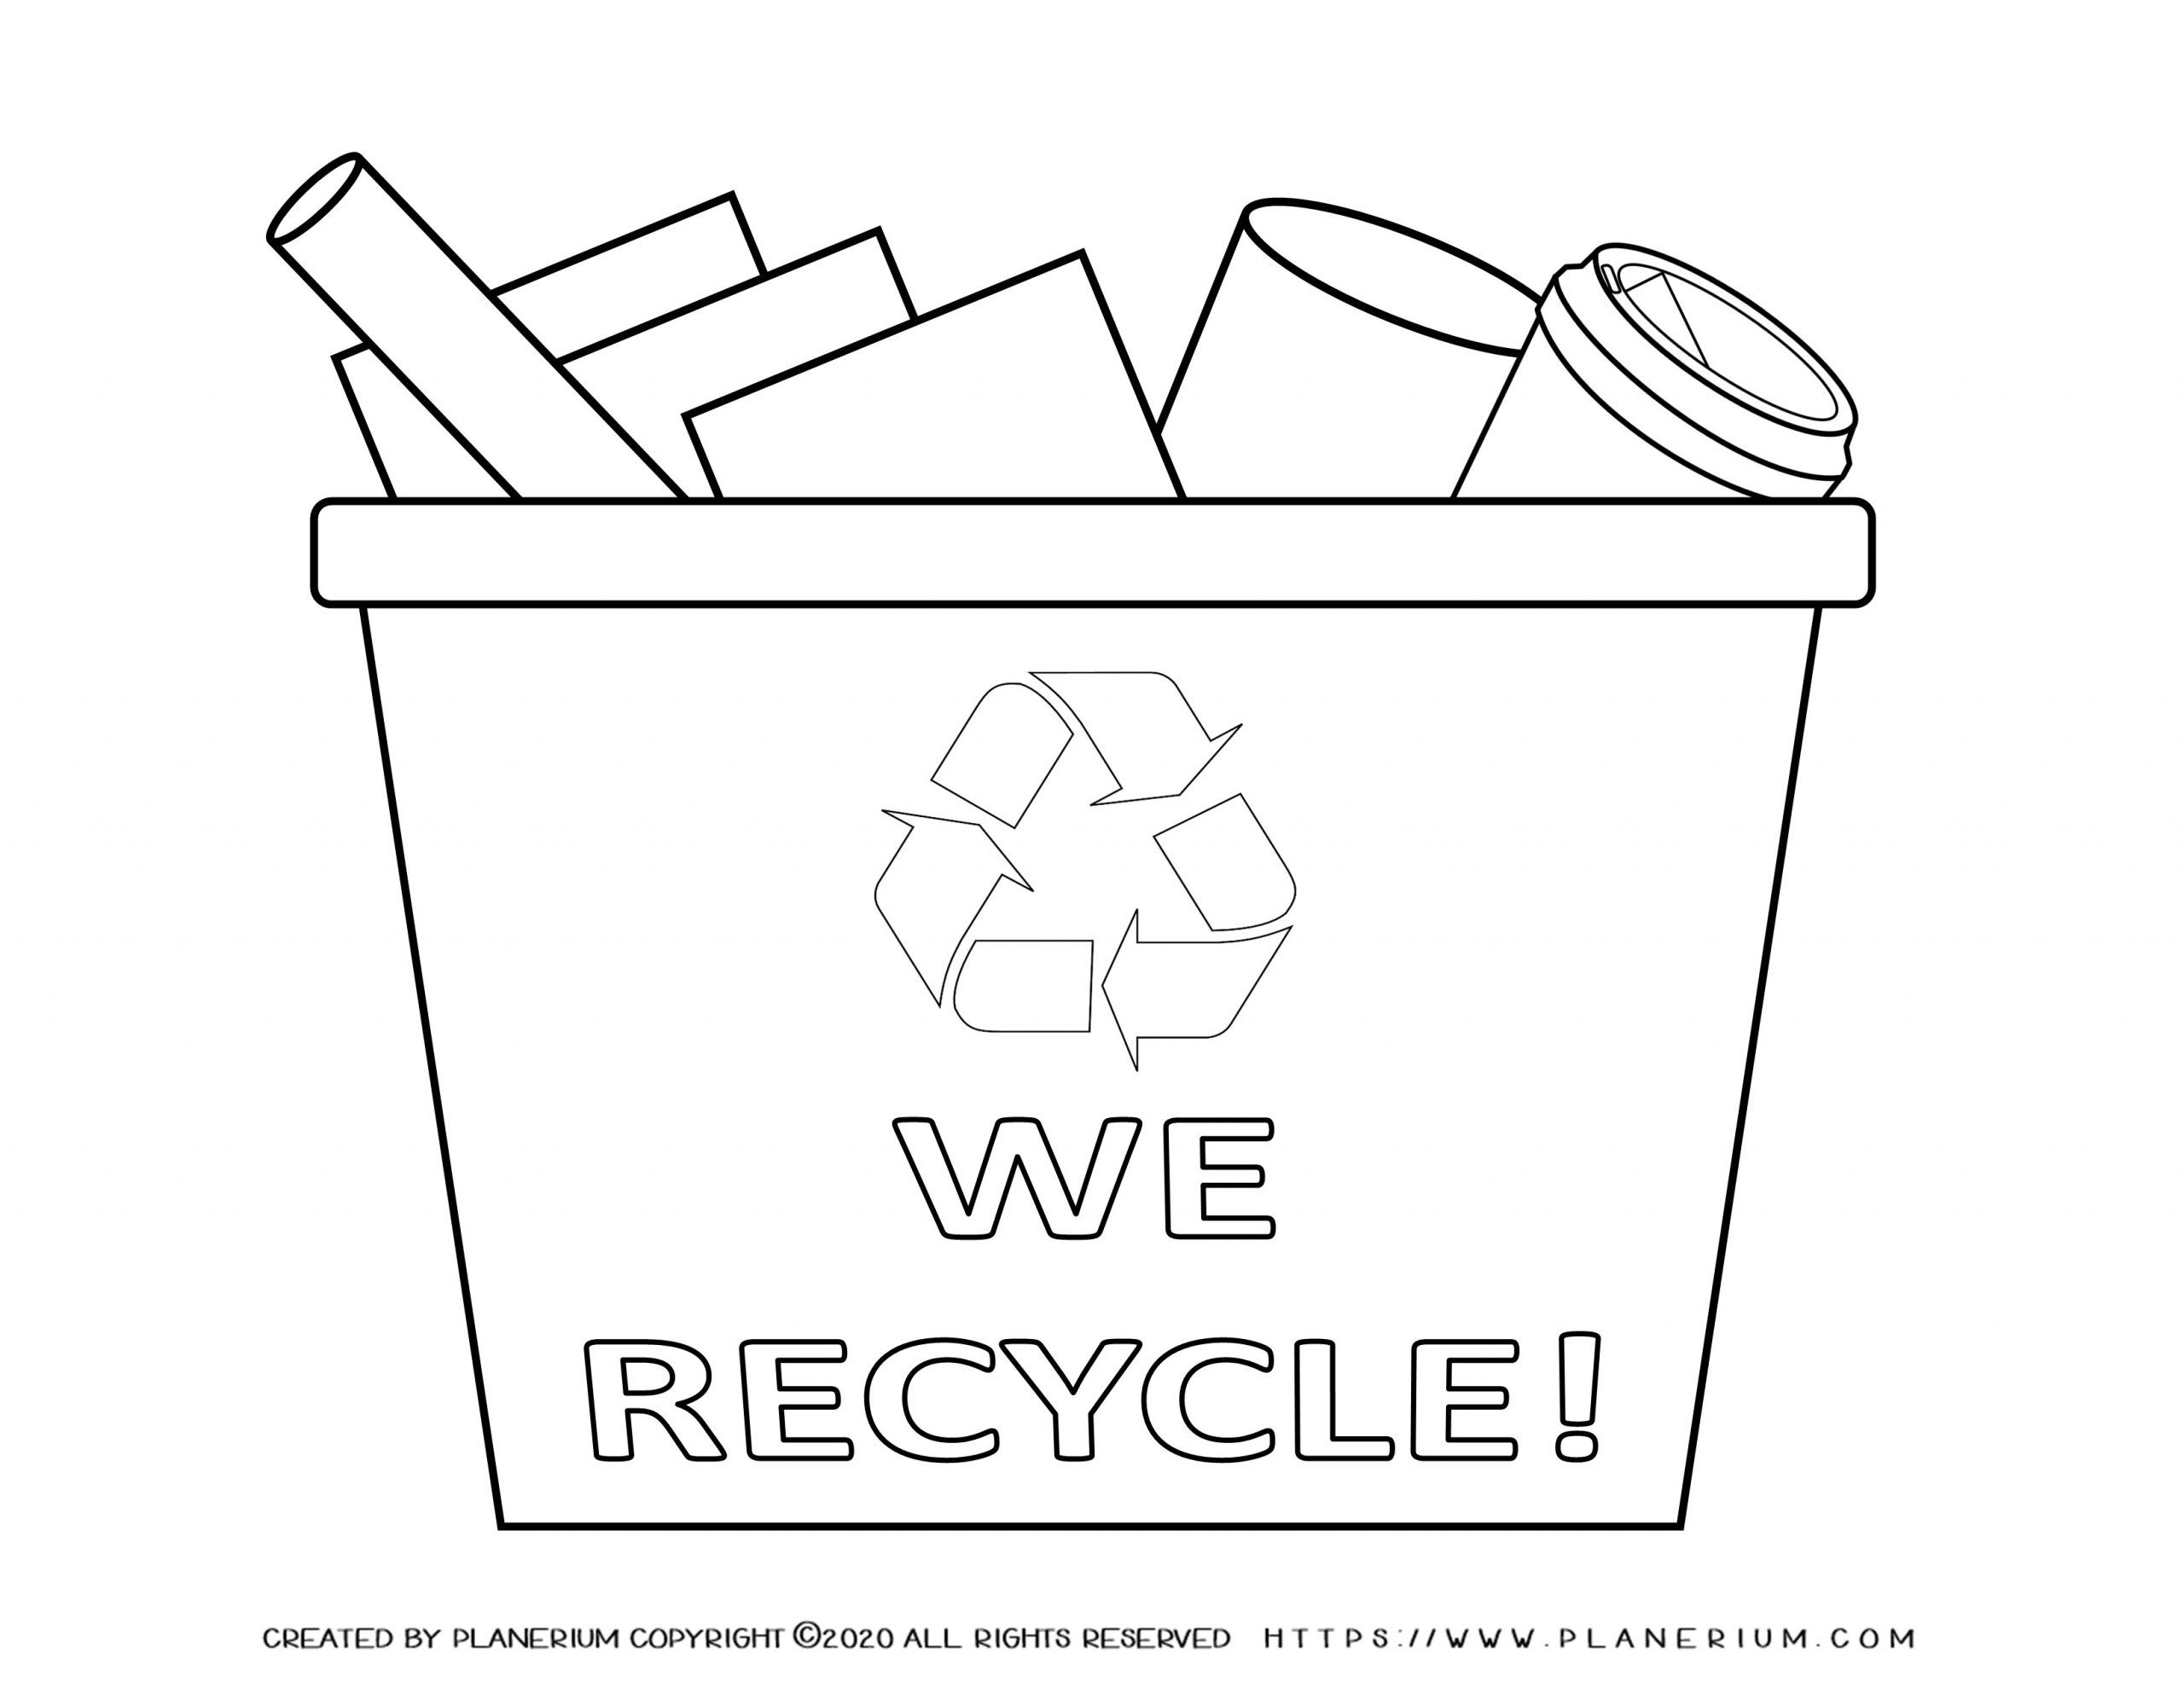 Earth Day - Coloring Page - We recycle | Planerium